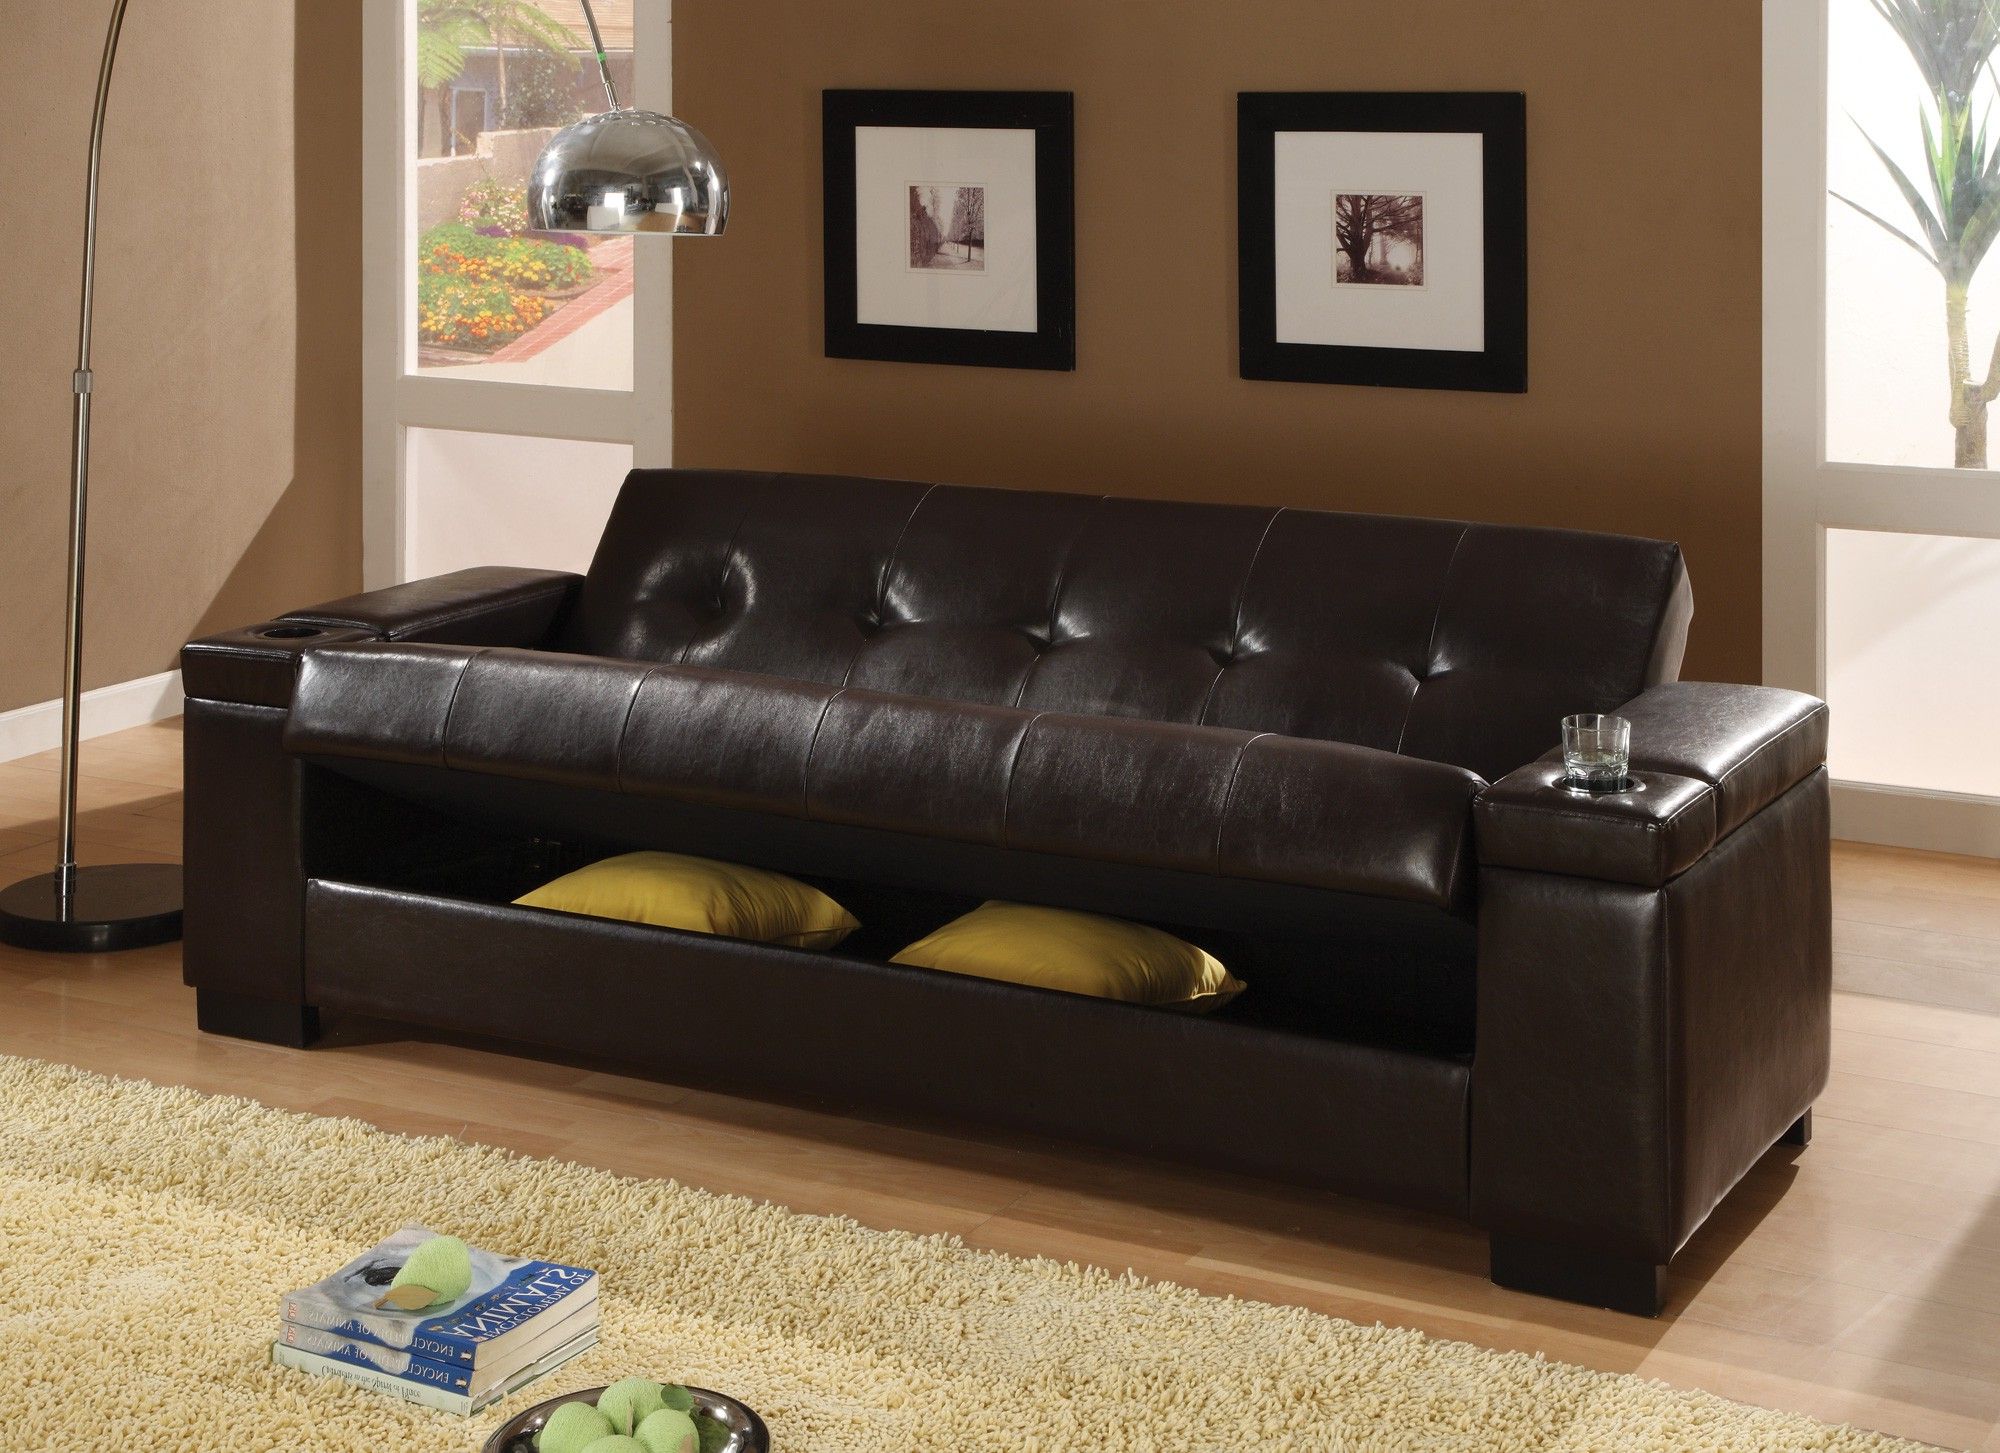 Preferred Faux Leather Convertible Sofa Sleeper With Storage 300143 From Coaster With 8 Seat Convertible Sofas (View 9 of 15)